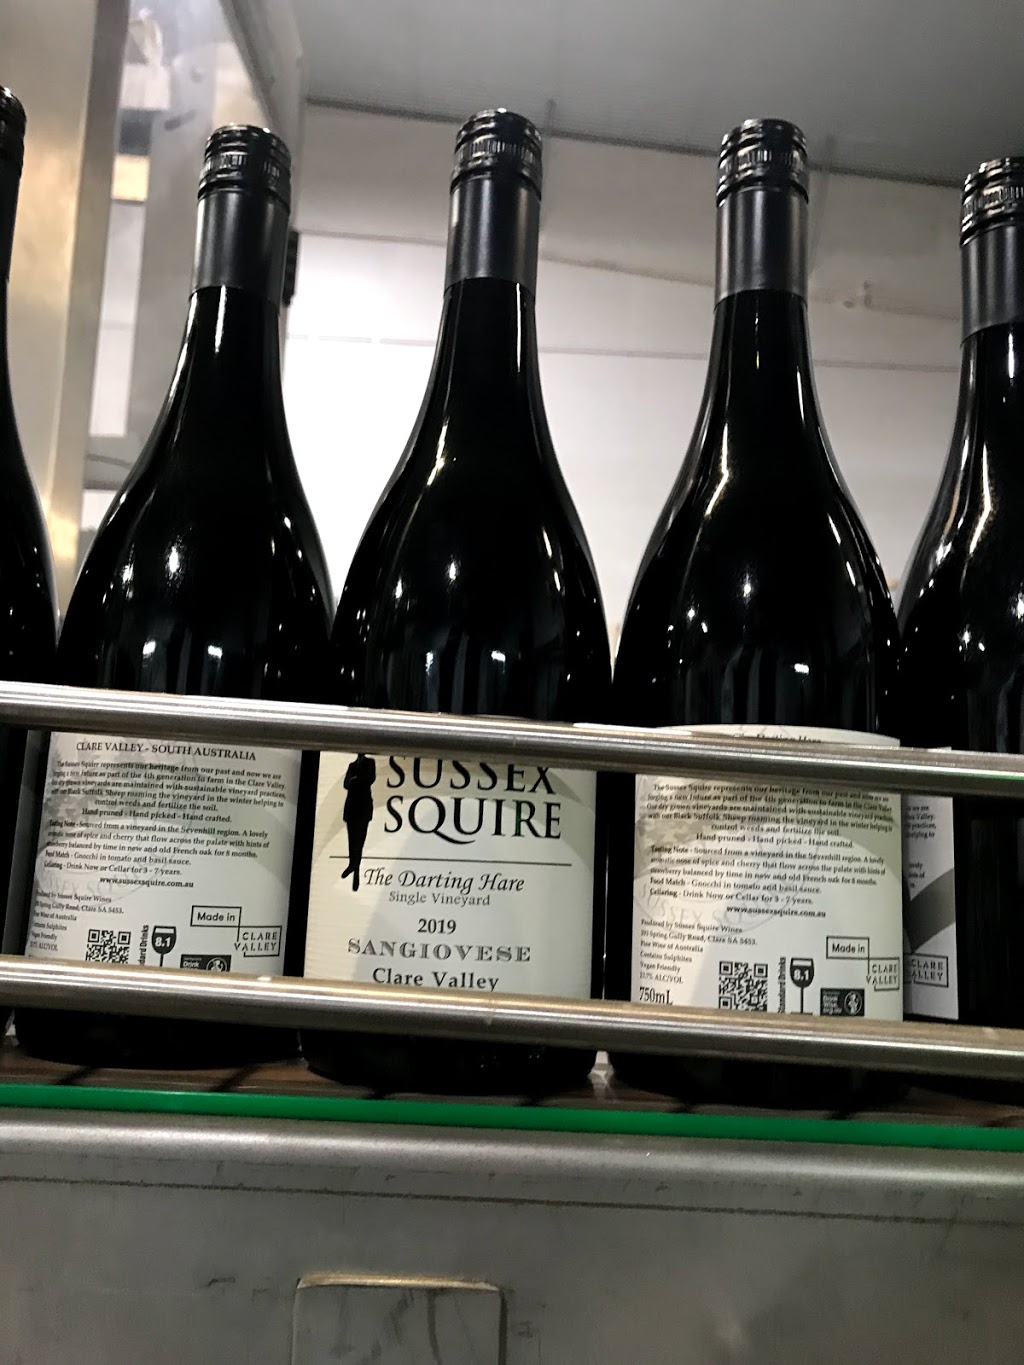 Sussex Squire Wines | store | 293-295 Spring Gully Rd, Clare SA 5453, Australia | 0458141169 OR +61 458 141 169